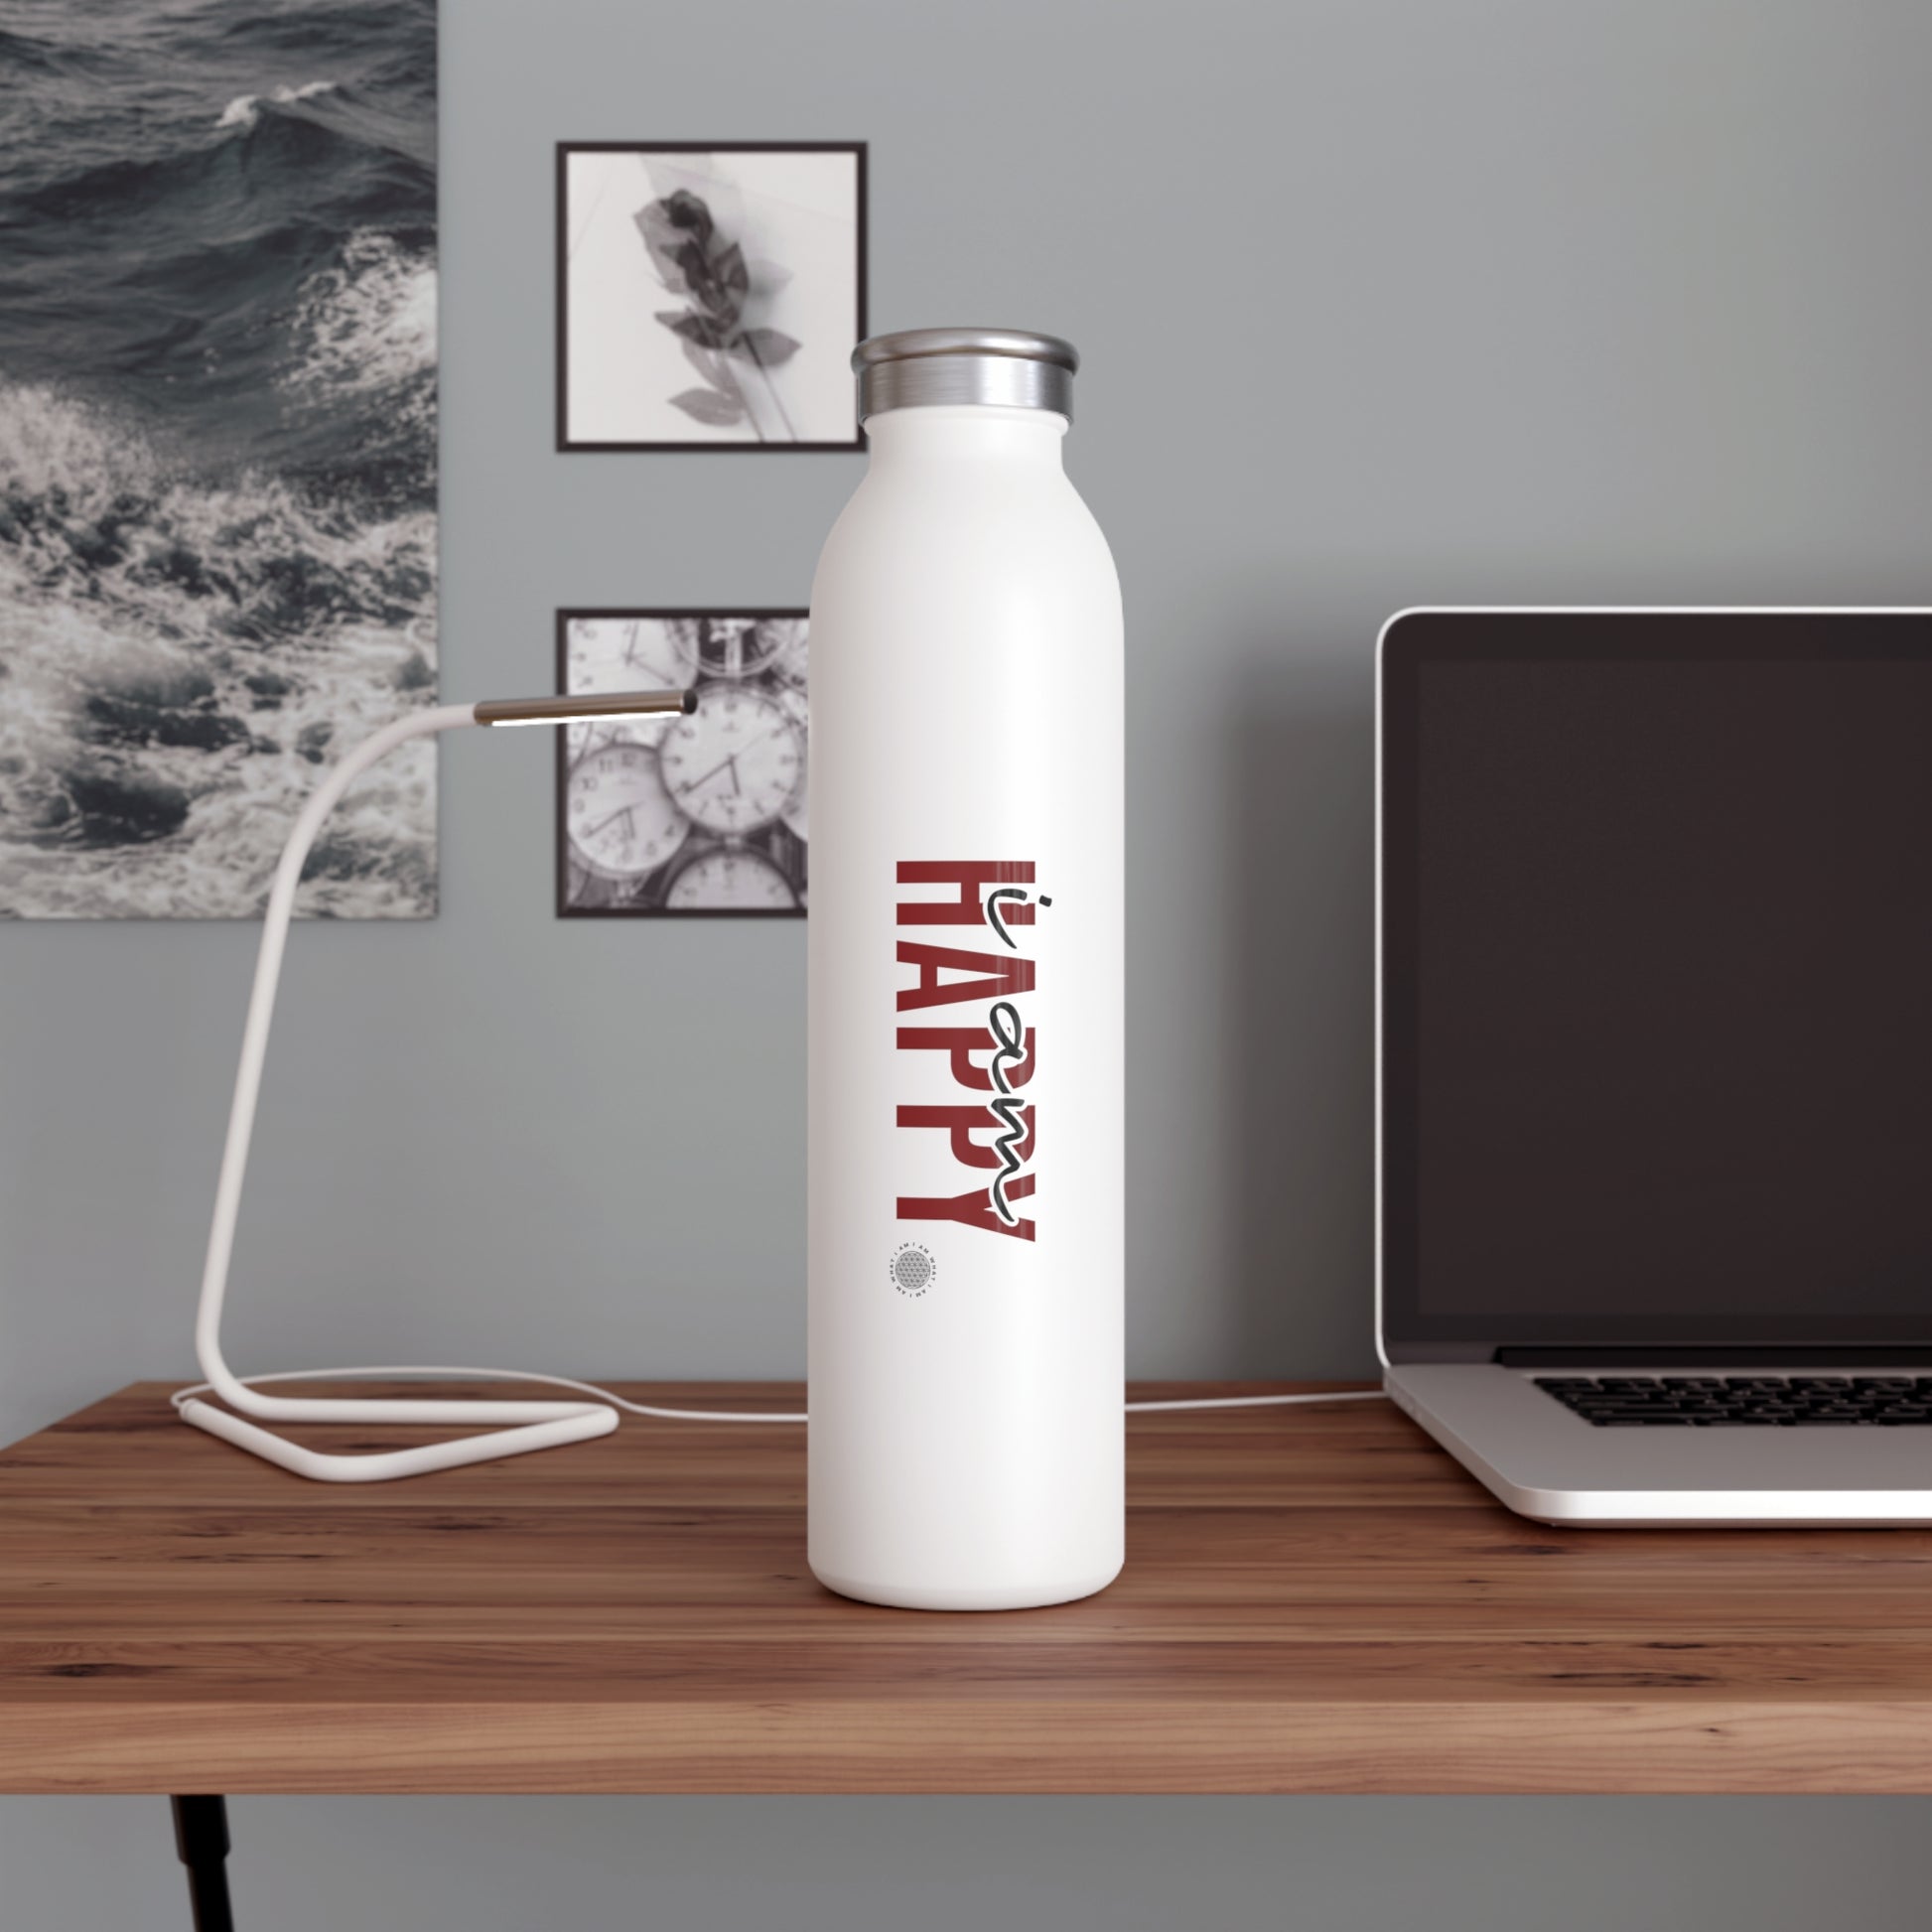 Our I Am Happy affirmation water bottle is one of our positive affirmations for mental health. Positive thinking keeps our mindset happy and healthy. This personalized water bottle was designed to become a creator’s favorite canvas of expression.